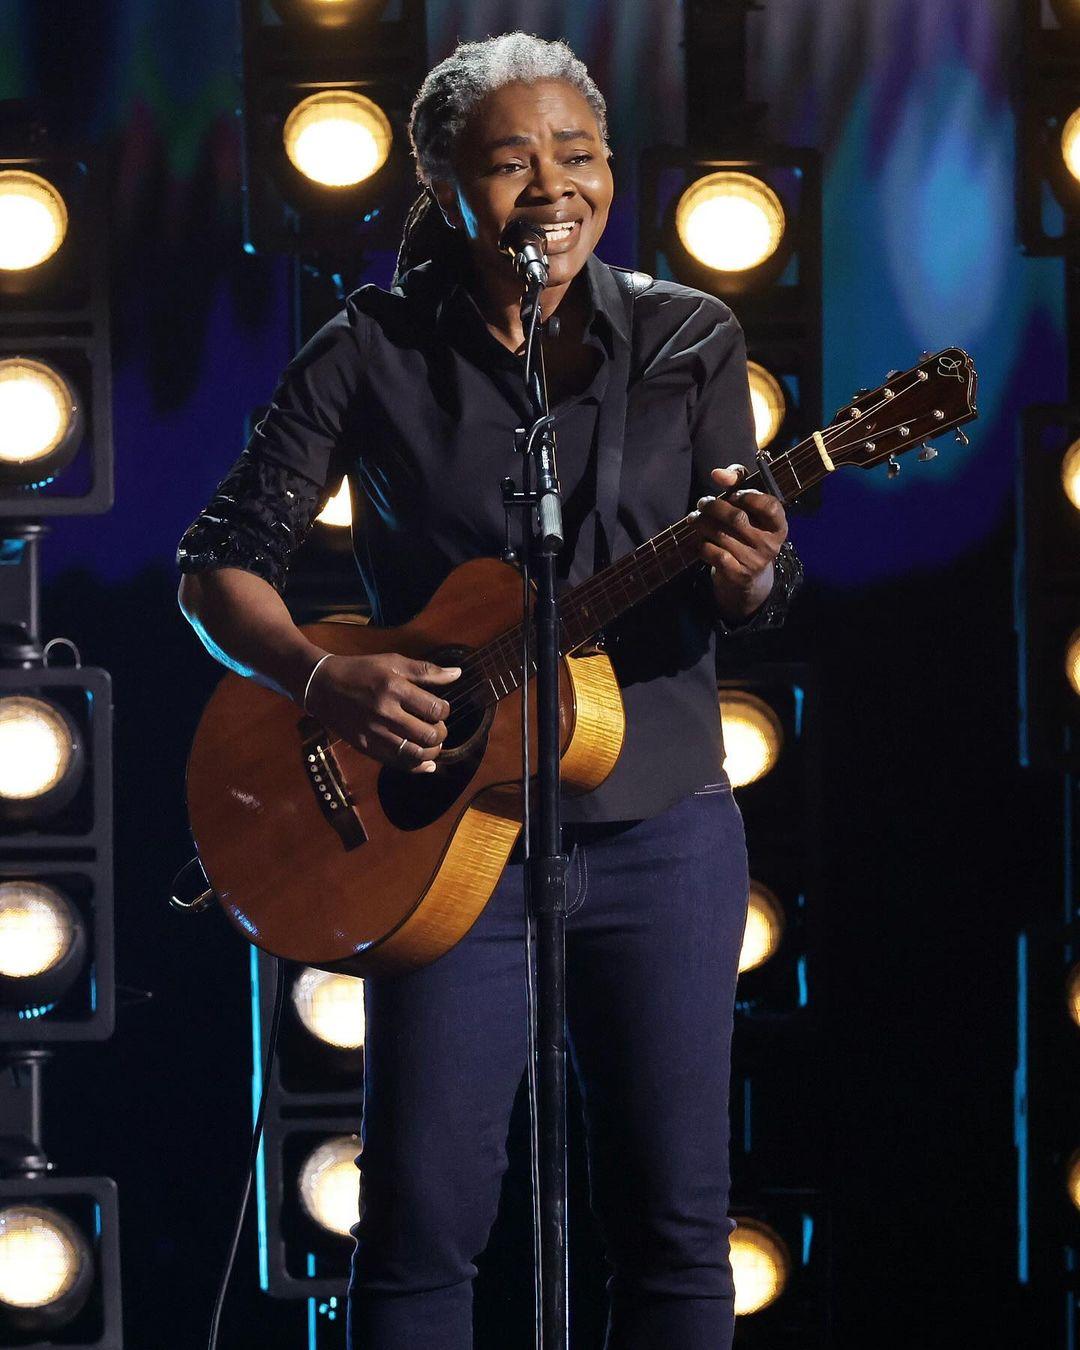 Tracy Chapman punctuated her incredible Grammys comeback performance with a custom @prada look.

Learn how the legendary musician—who sang her 1988 hit “Fast Car” with @lukecombs—wore an ensemble that nodded to her 1989 Grammys performance at the link in bio.